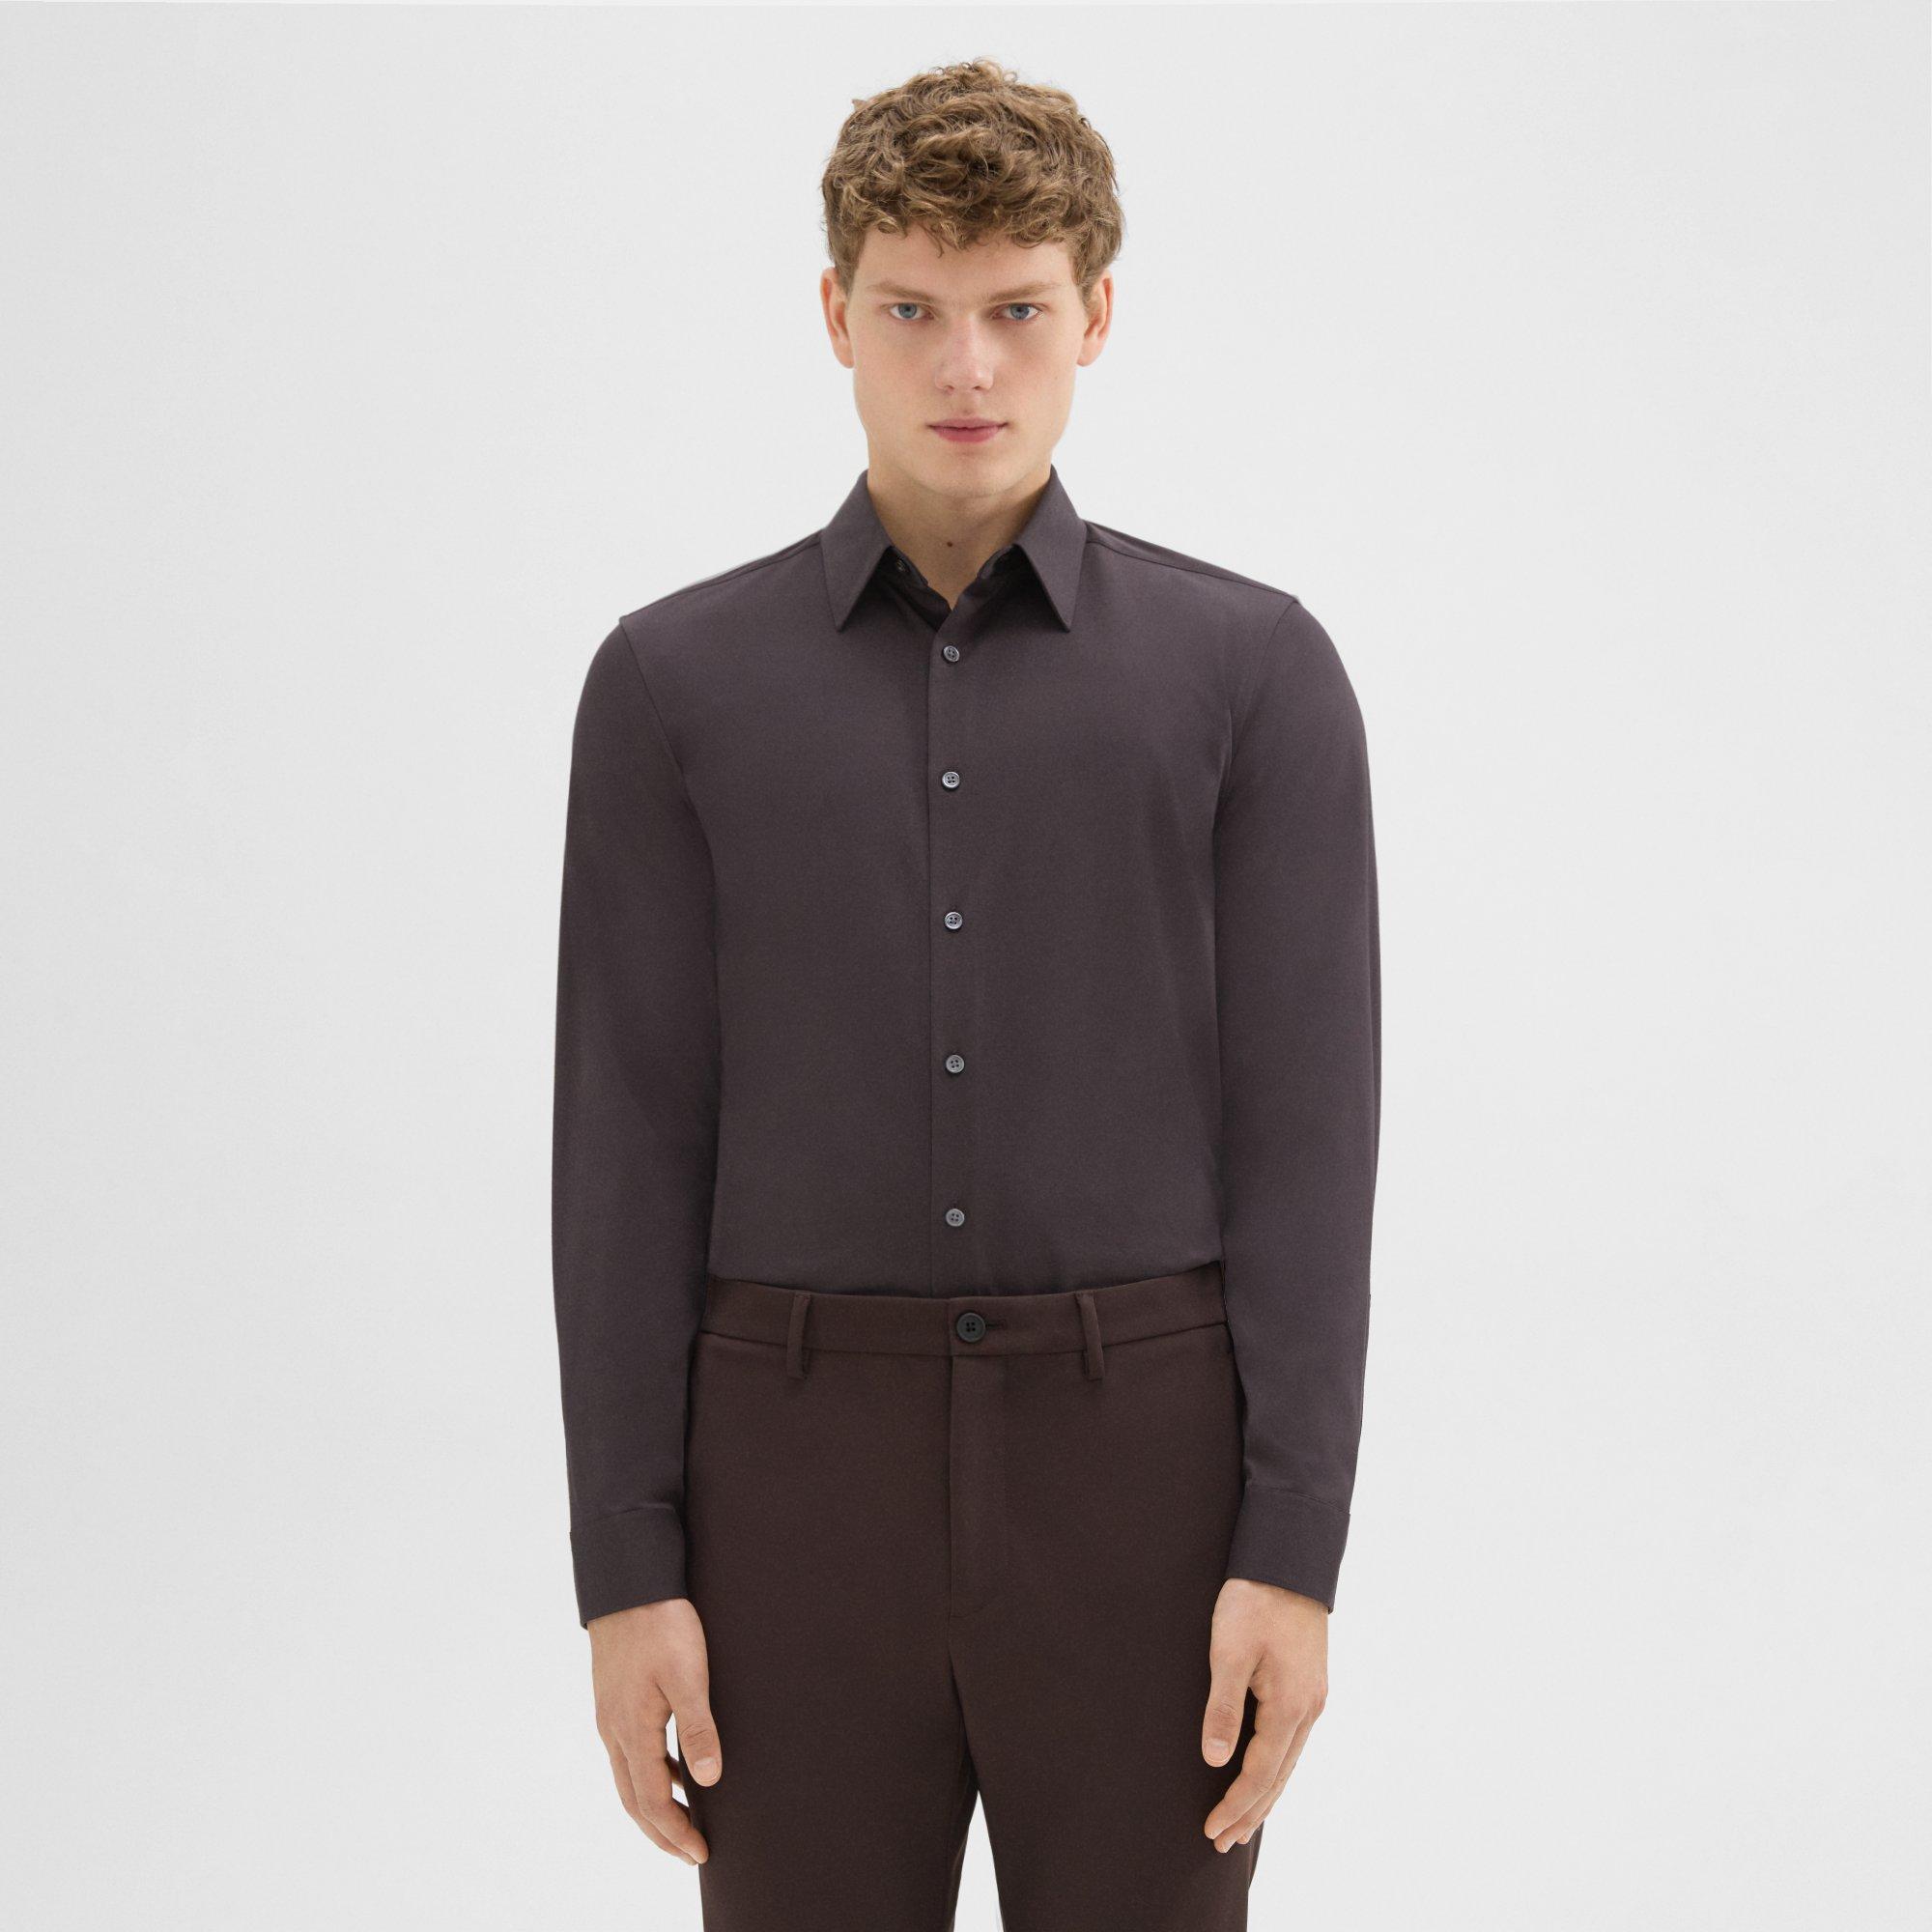 Men's Sport and Dress Shirts | Theory